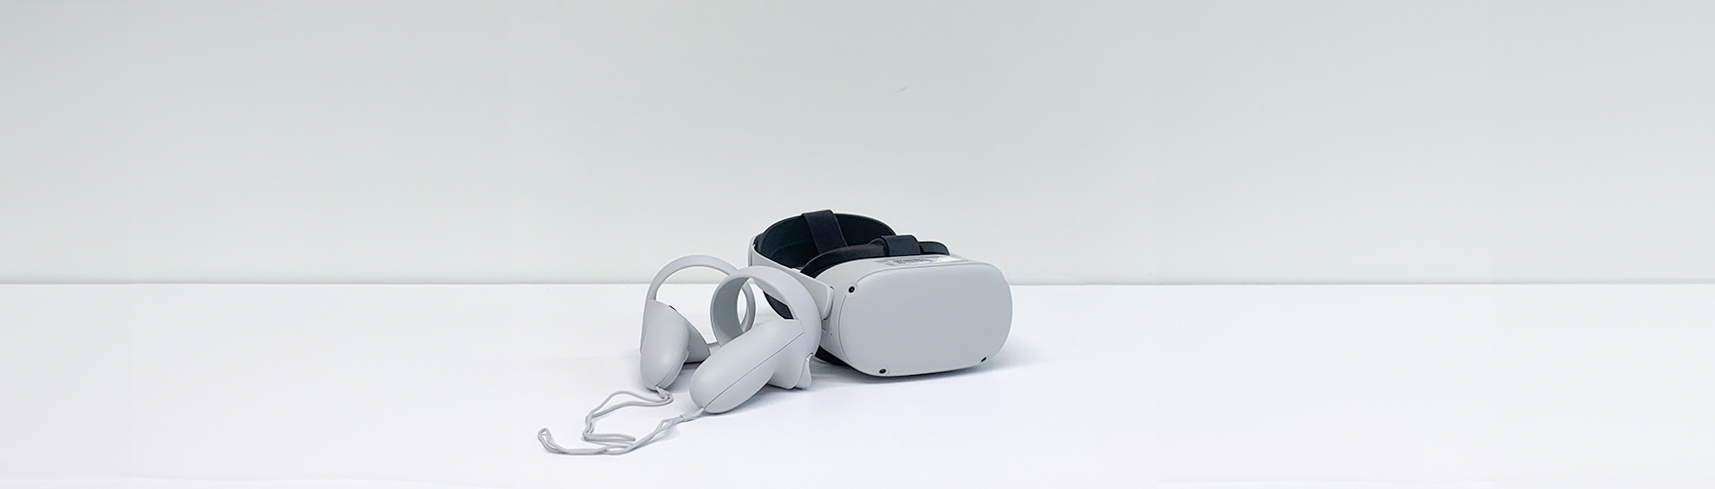 A standalone VR headset lying on a grey table. Two standart controllers lying next to it.